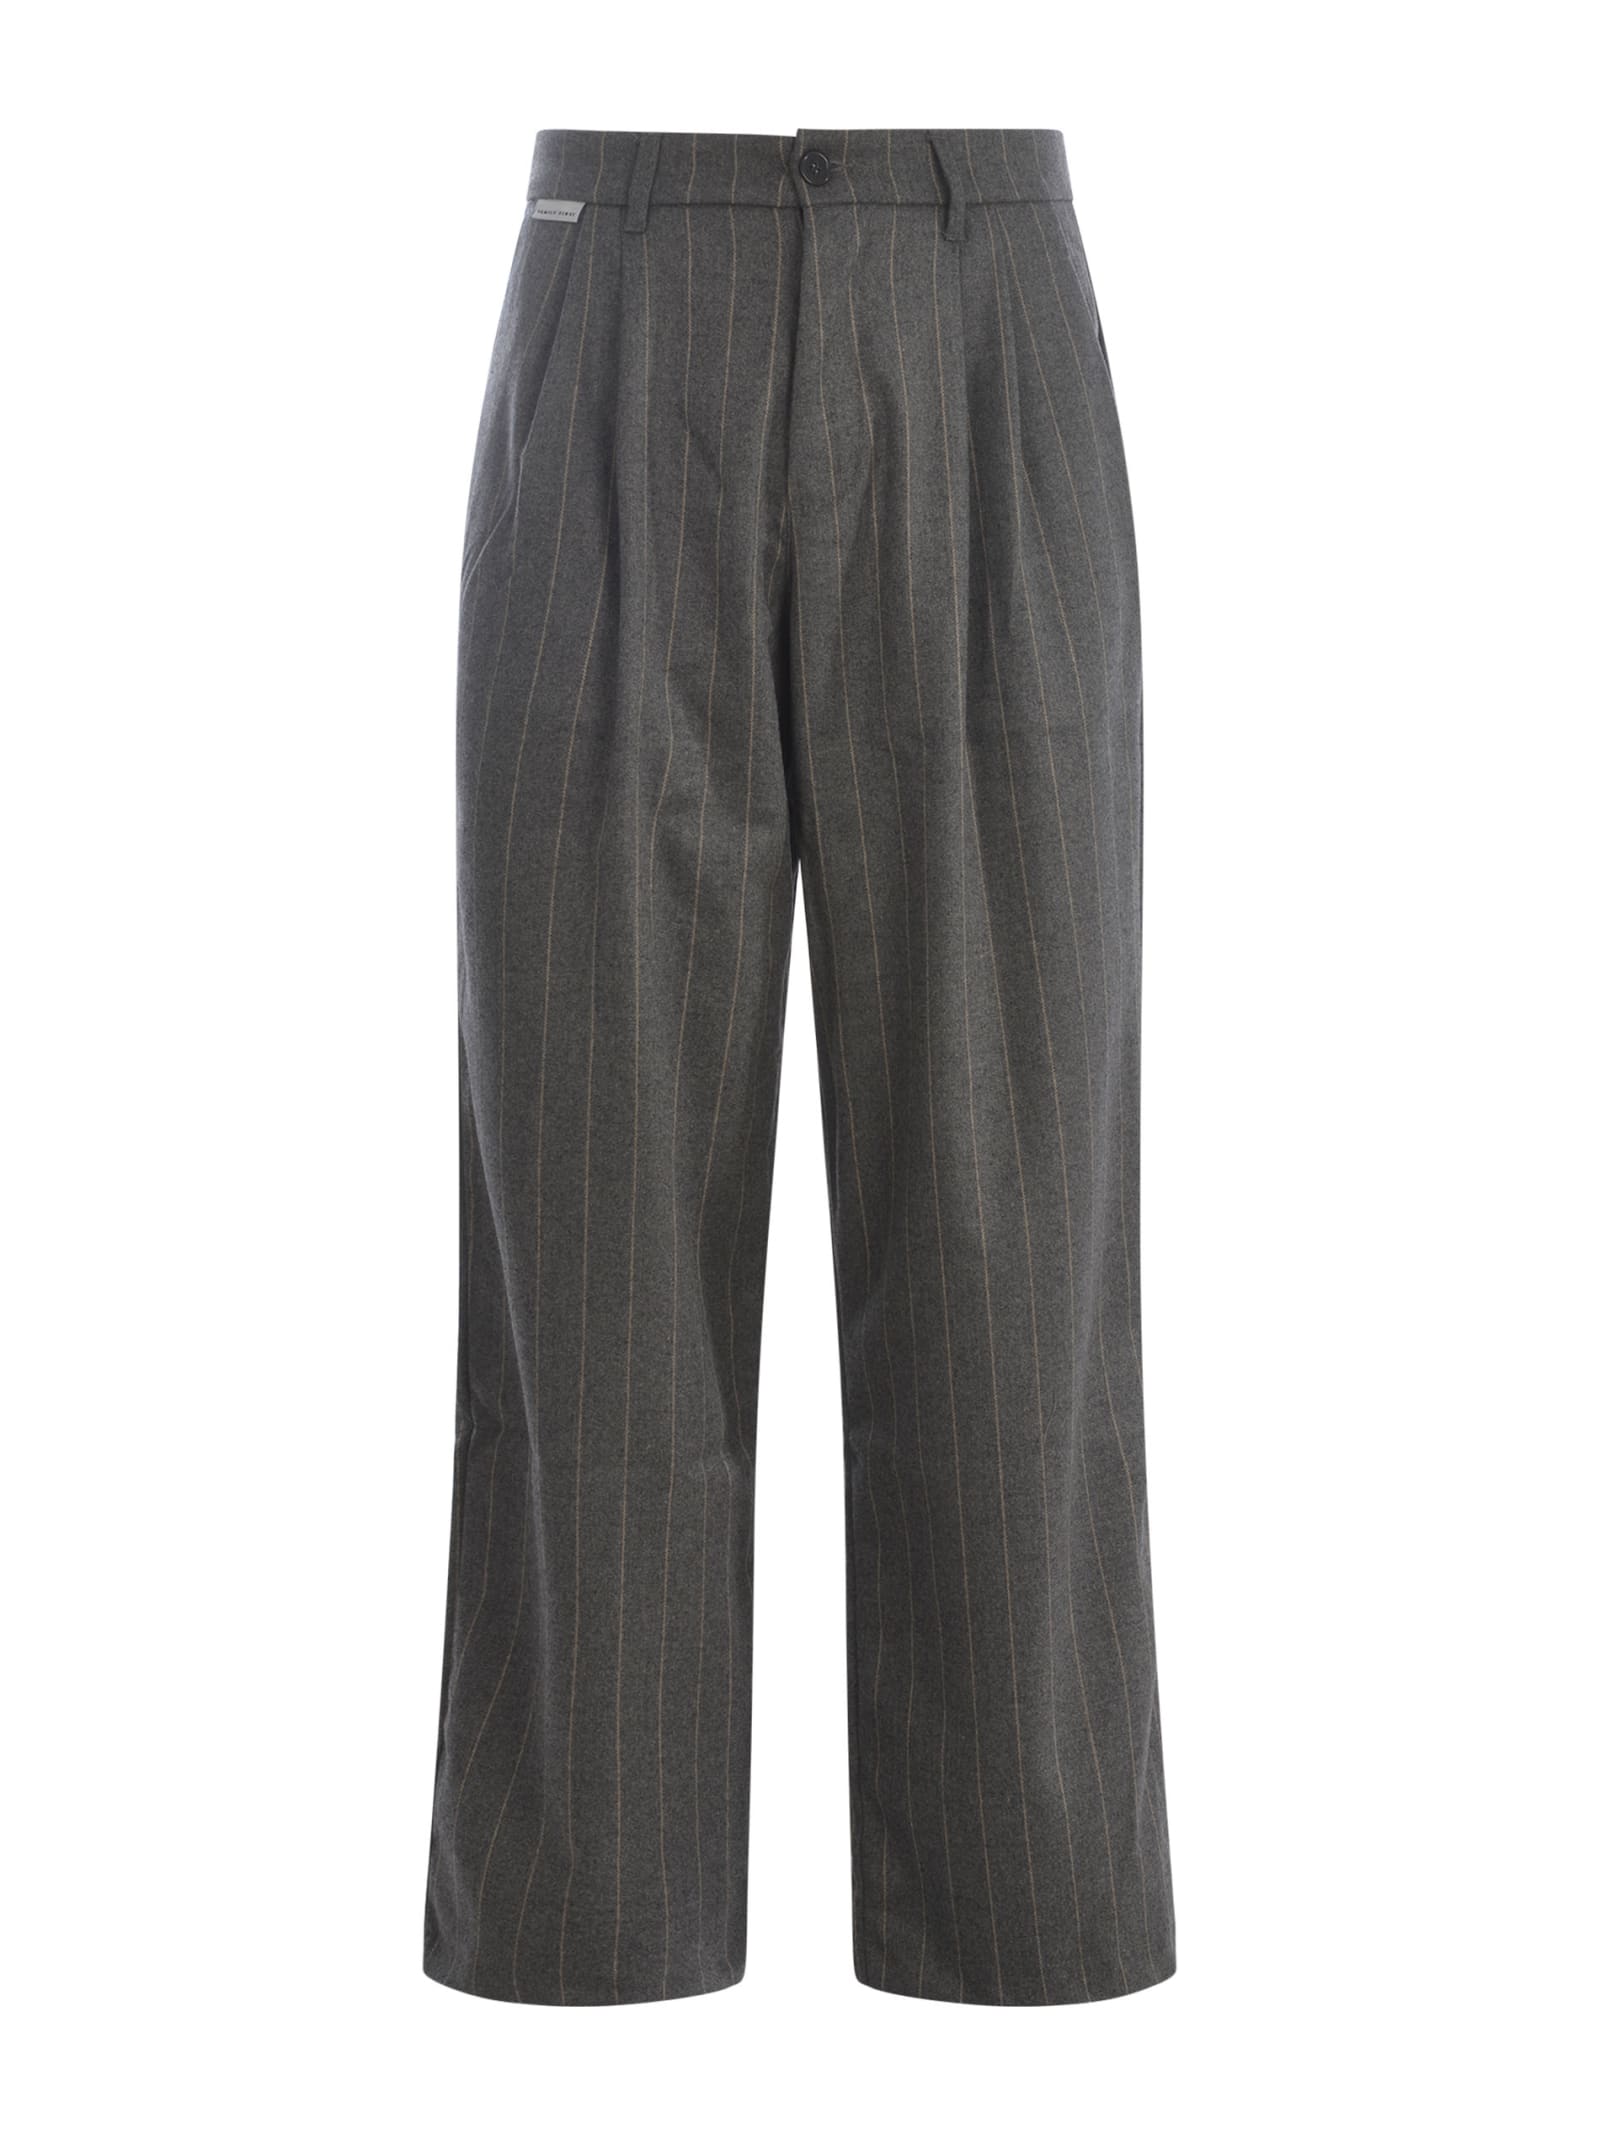 Trousers Family First new Tube Classic In Wool Blend